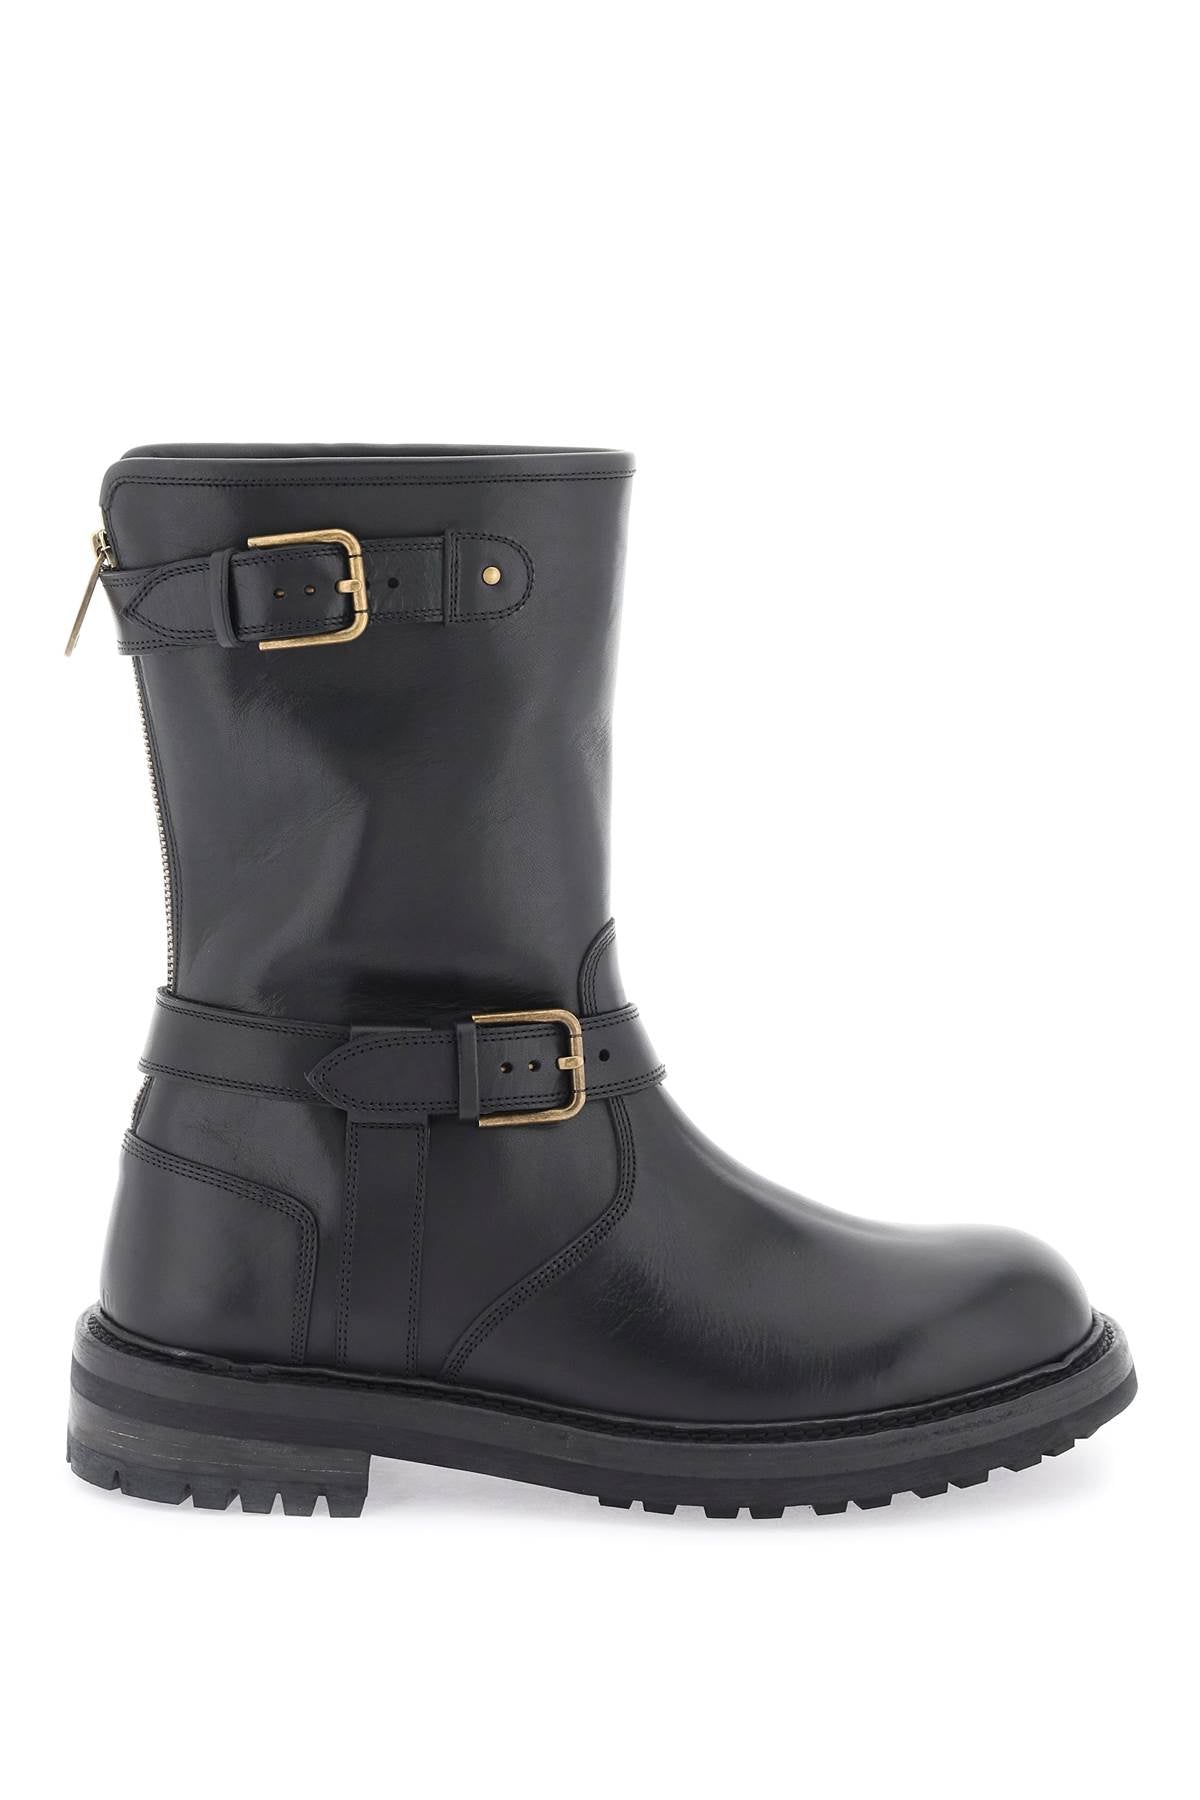 Shop Dolce & Gabbana Men's Black Leather Biker Boots From The Fw23 Collection